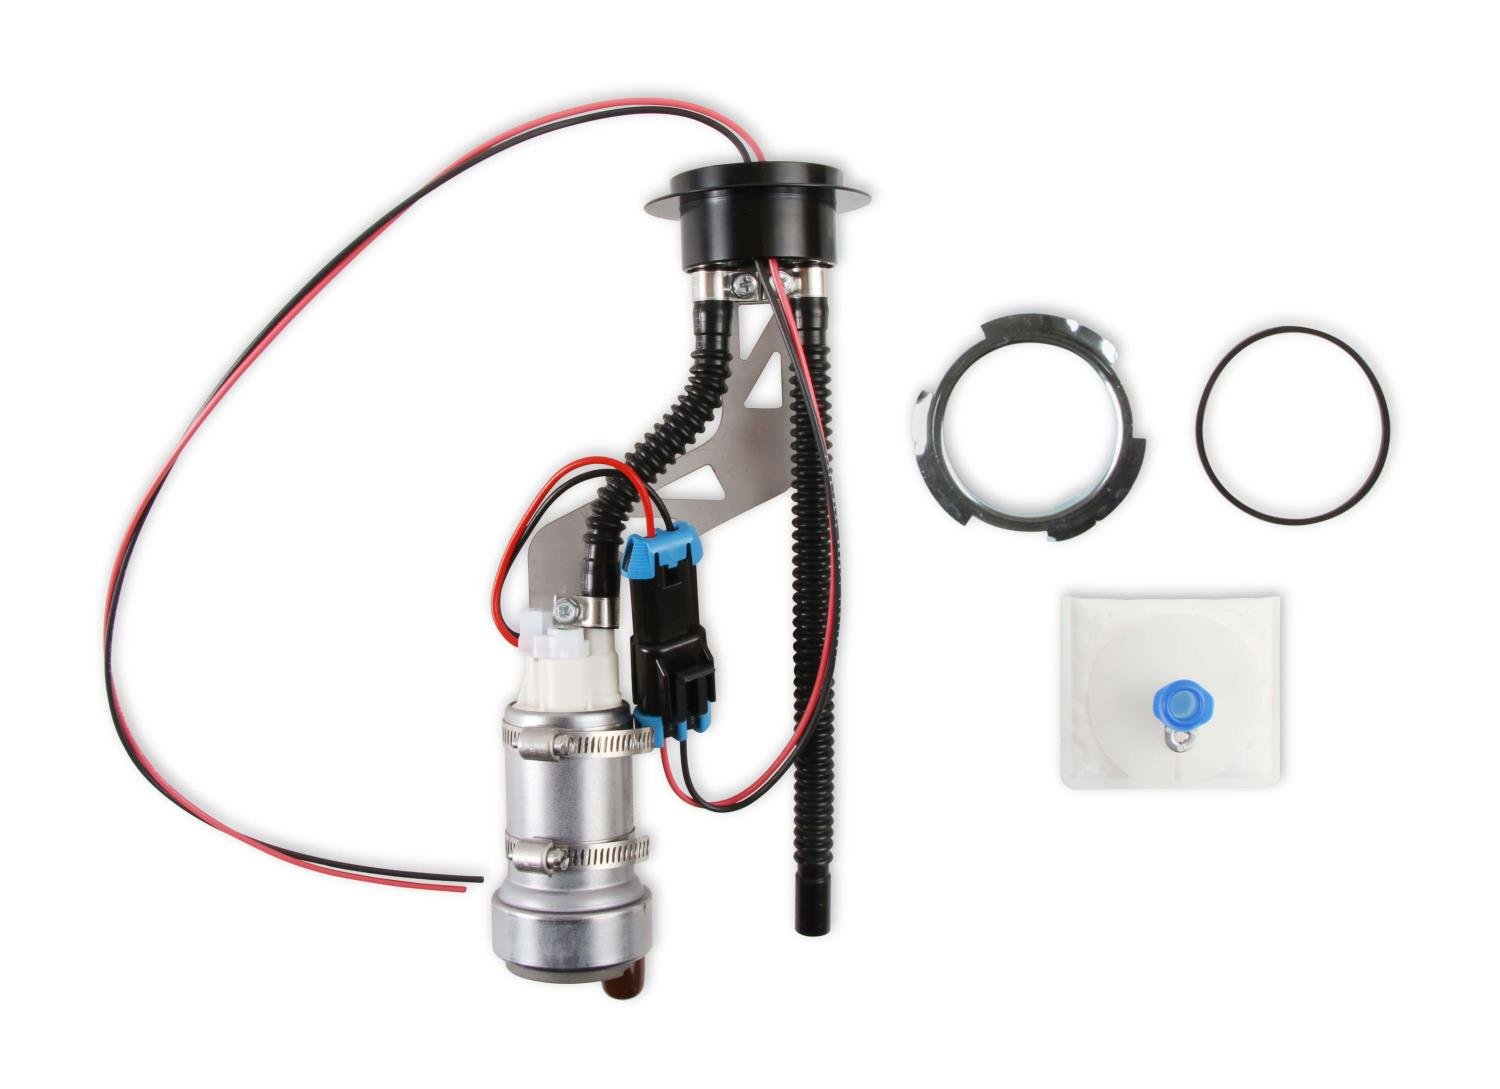 OEM-Style EFI Fuel Pump Module For 1983-1997 Ford Mustang [525 LPH]